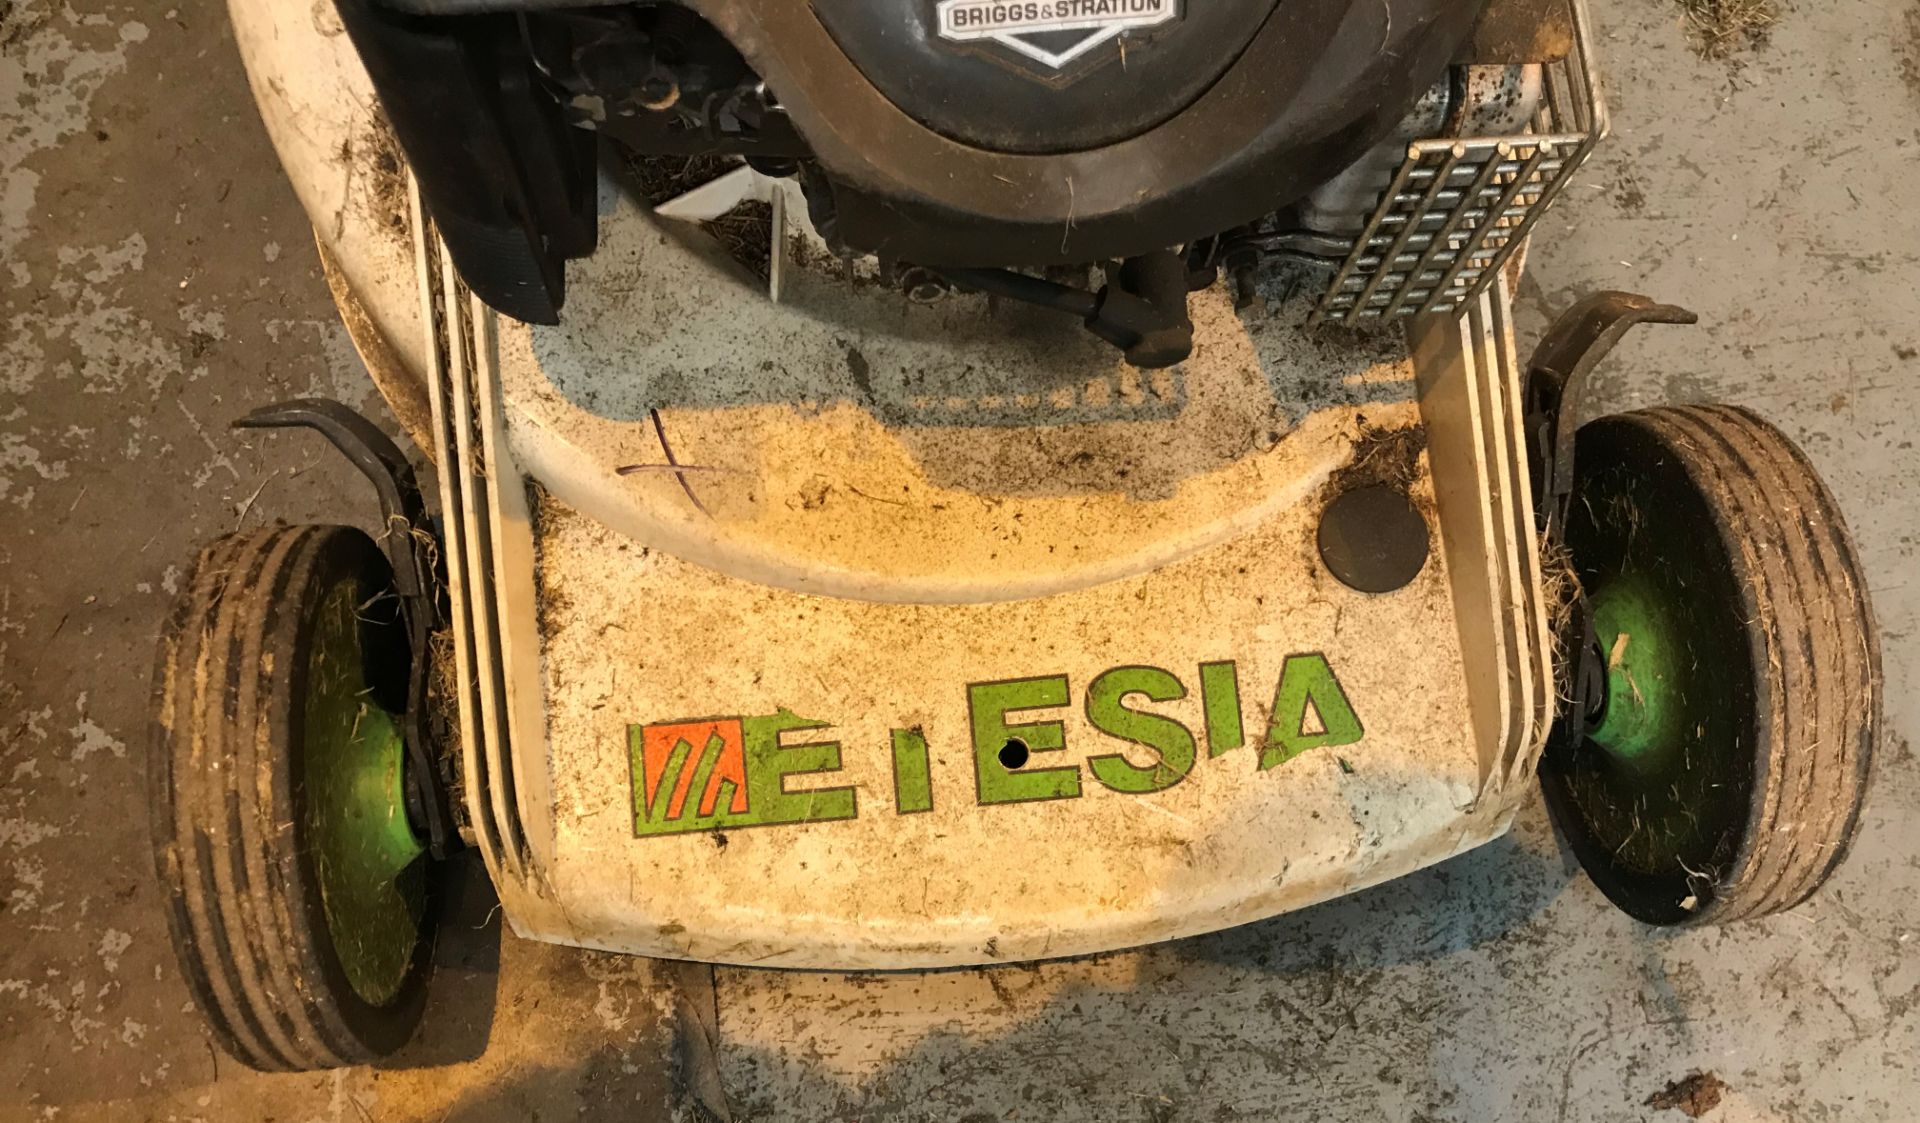 Etesia PBTS Self Propelled Commercial Lawn Mower | 2011 - Image 4 of 6